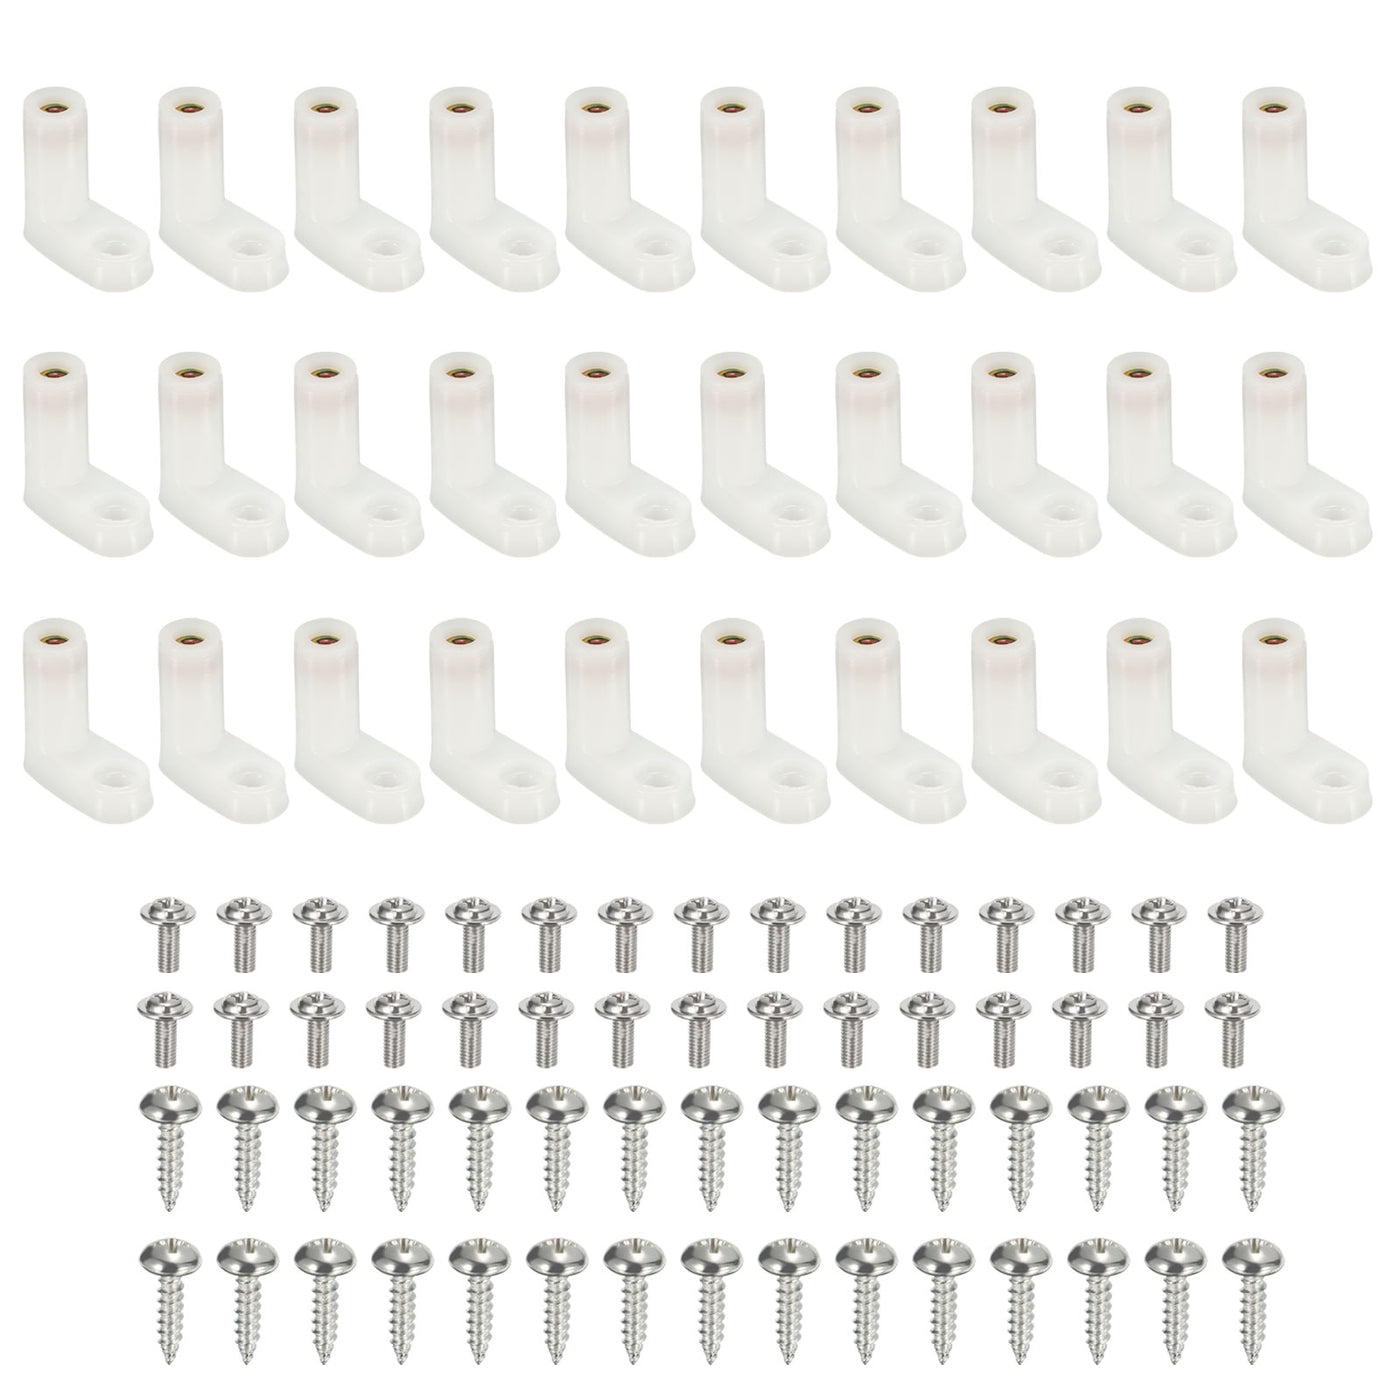 uxcell Uxcell 150 Pcs Circuit Board L Shape Insulated PCB Spacer 20mm Standoffs Mounting Feet Supporting Height with Screws White